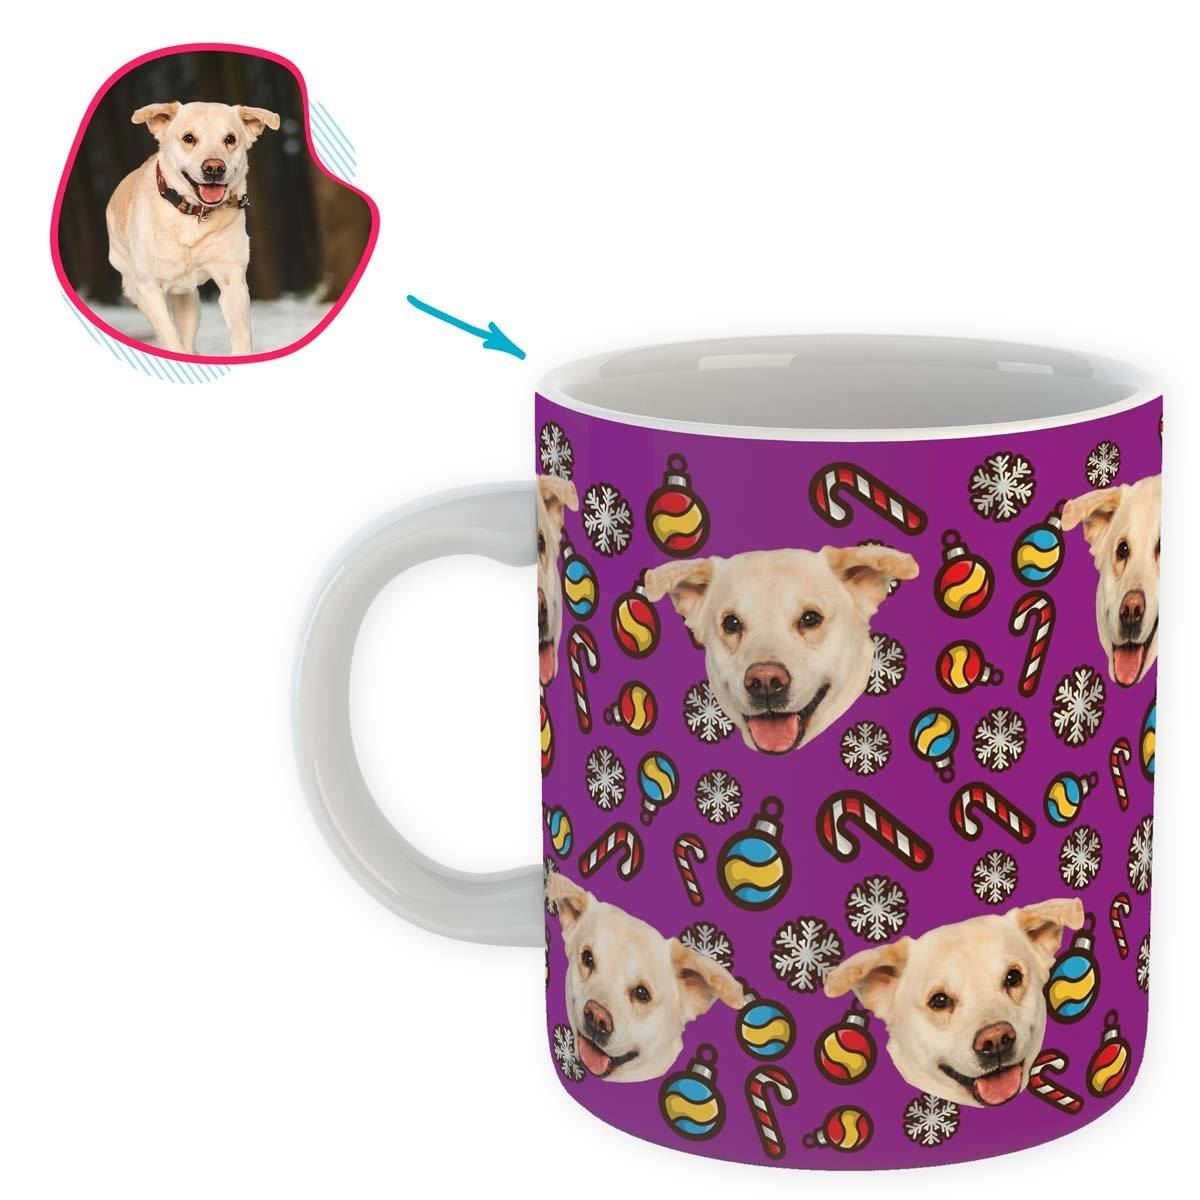 purple Christmas Tree Toy mug personalized with photo of face printed on it